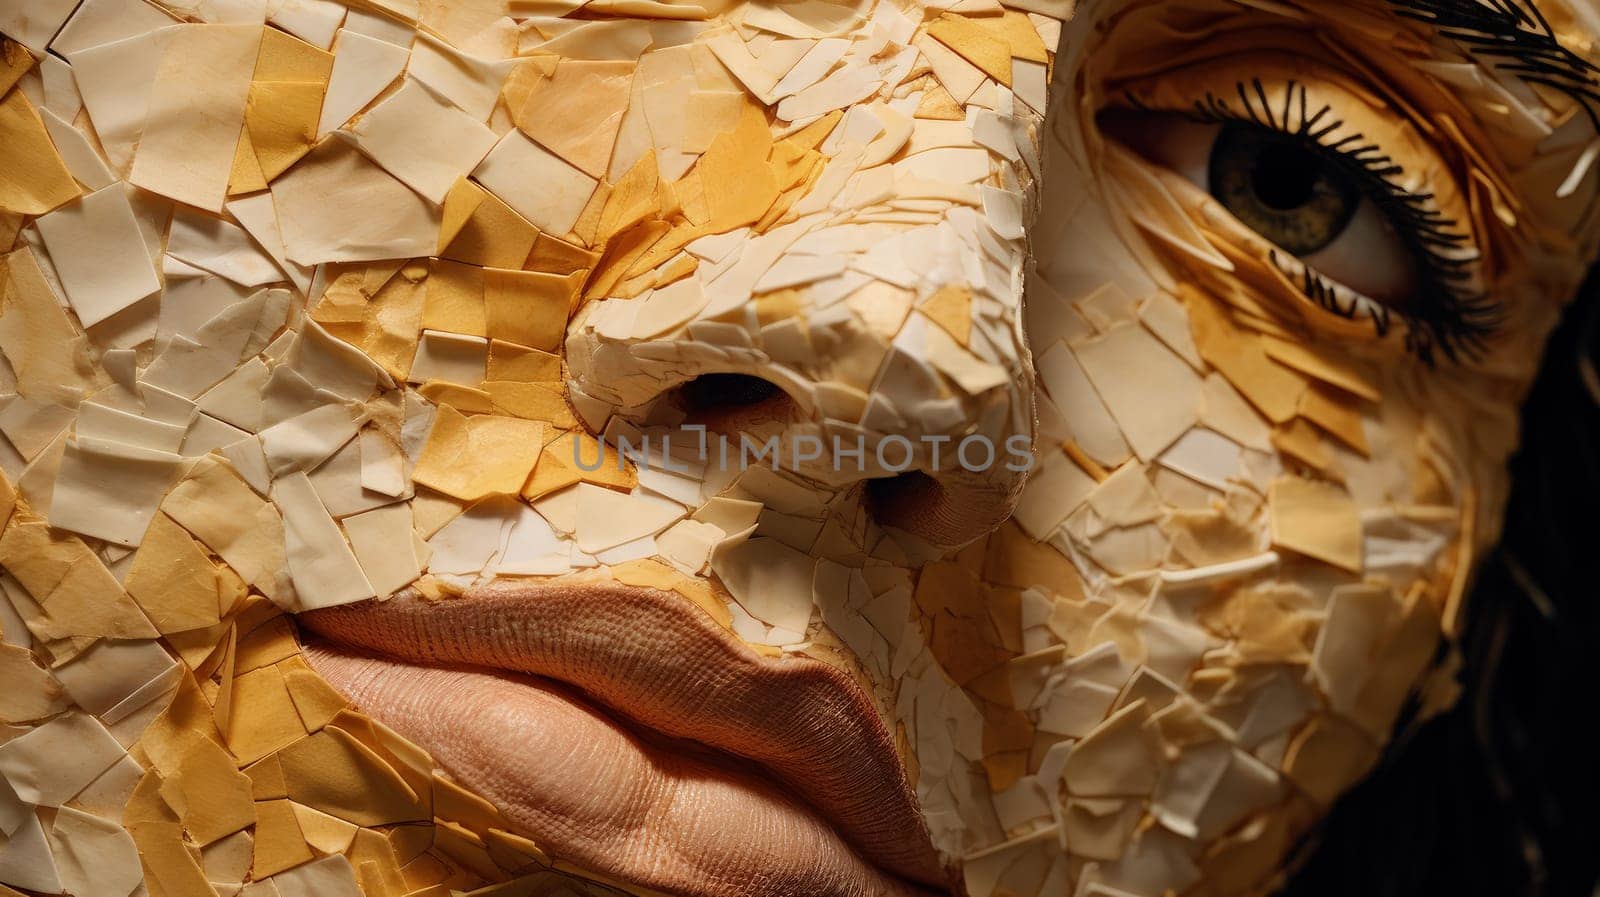 A close-up of a woman's face intricately adorned with melted cheese, emphasizing the textures and patterns created by the flowing cheese by Kadula